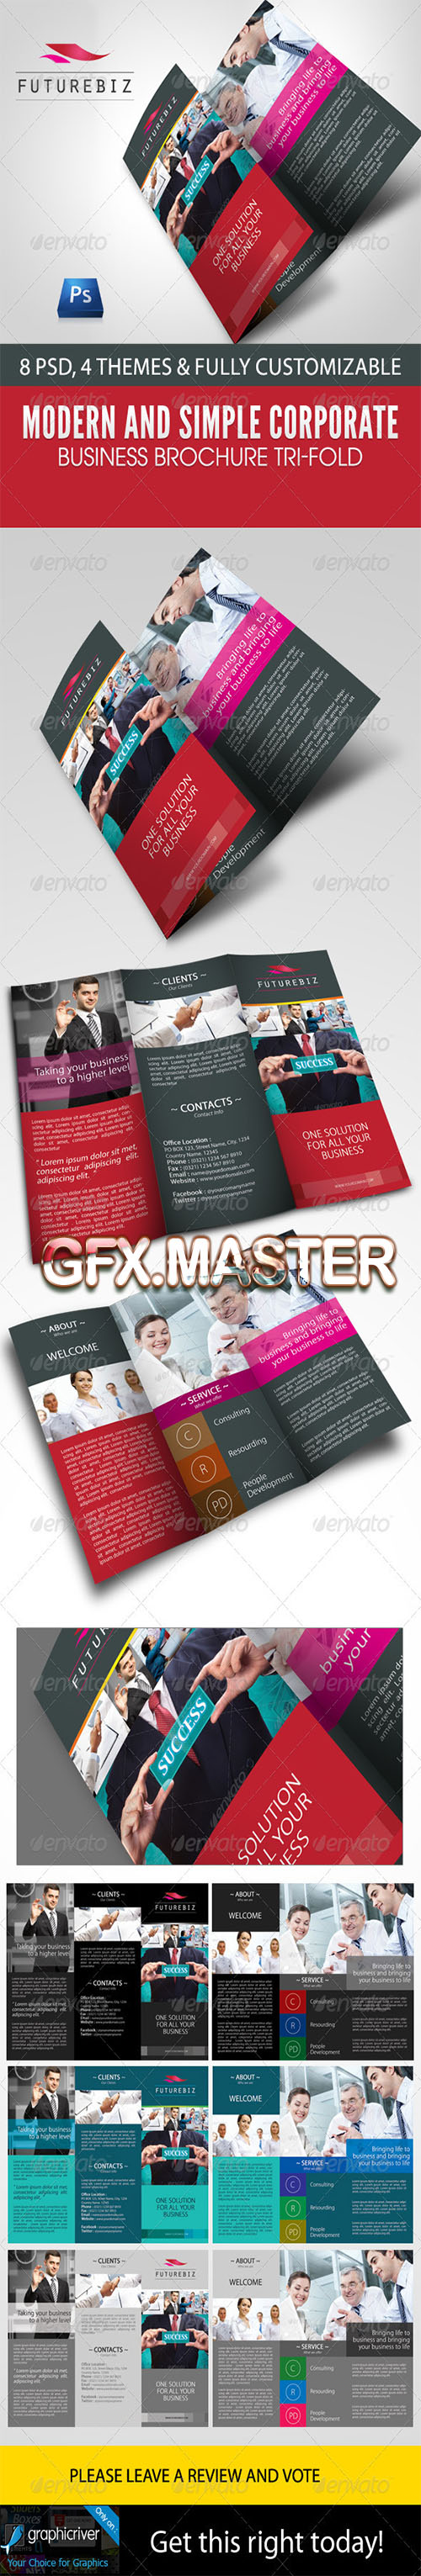 GraphicRiver - Modern and Simple Corporate Business Brochure